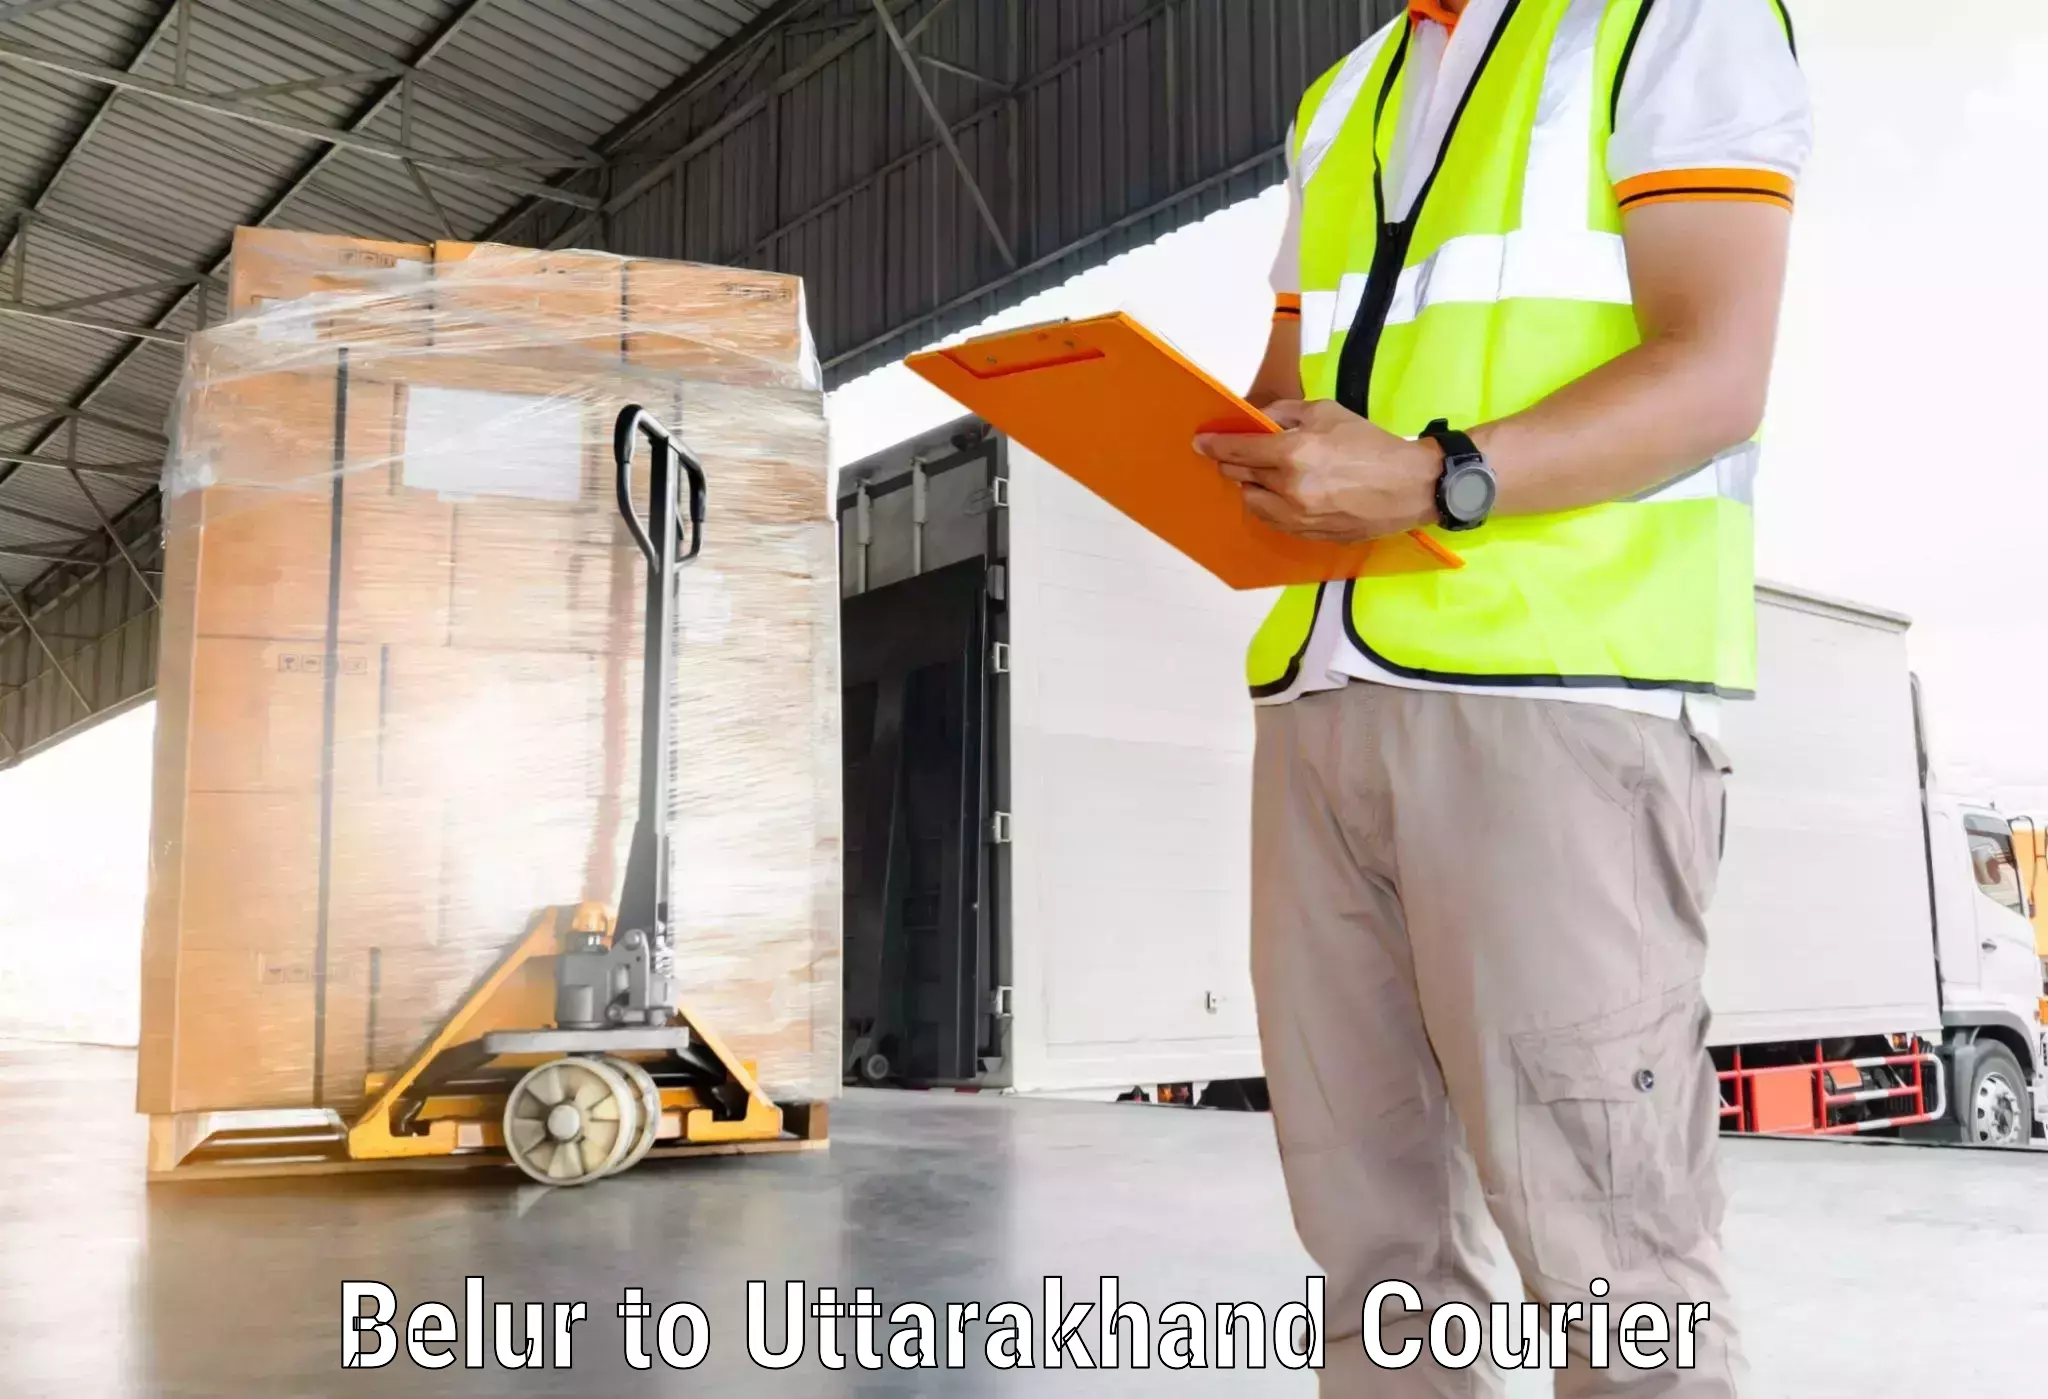 Courier service innovation Belur to Rishikesh